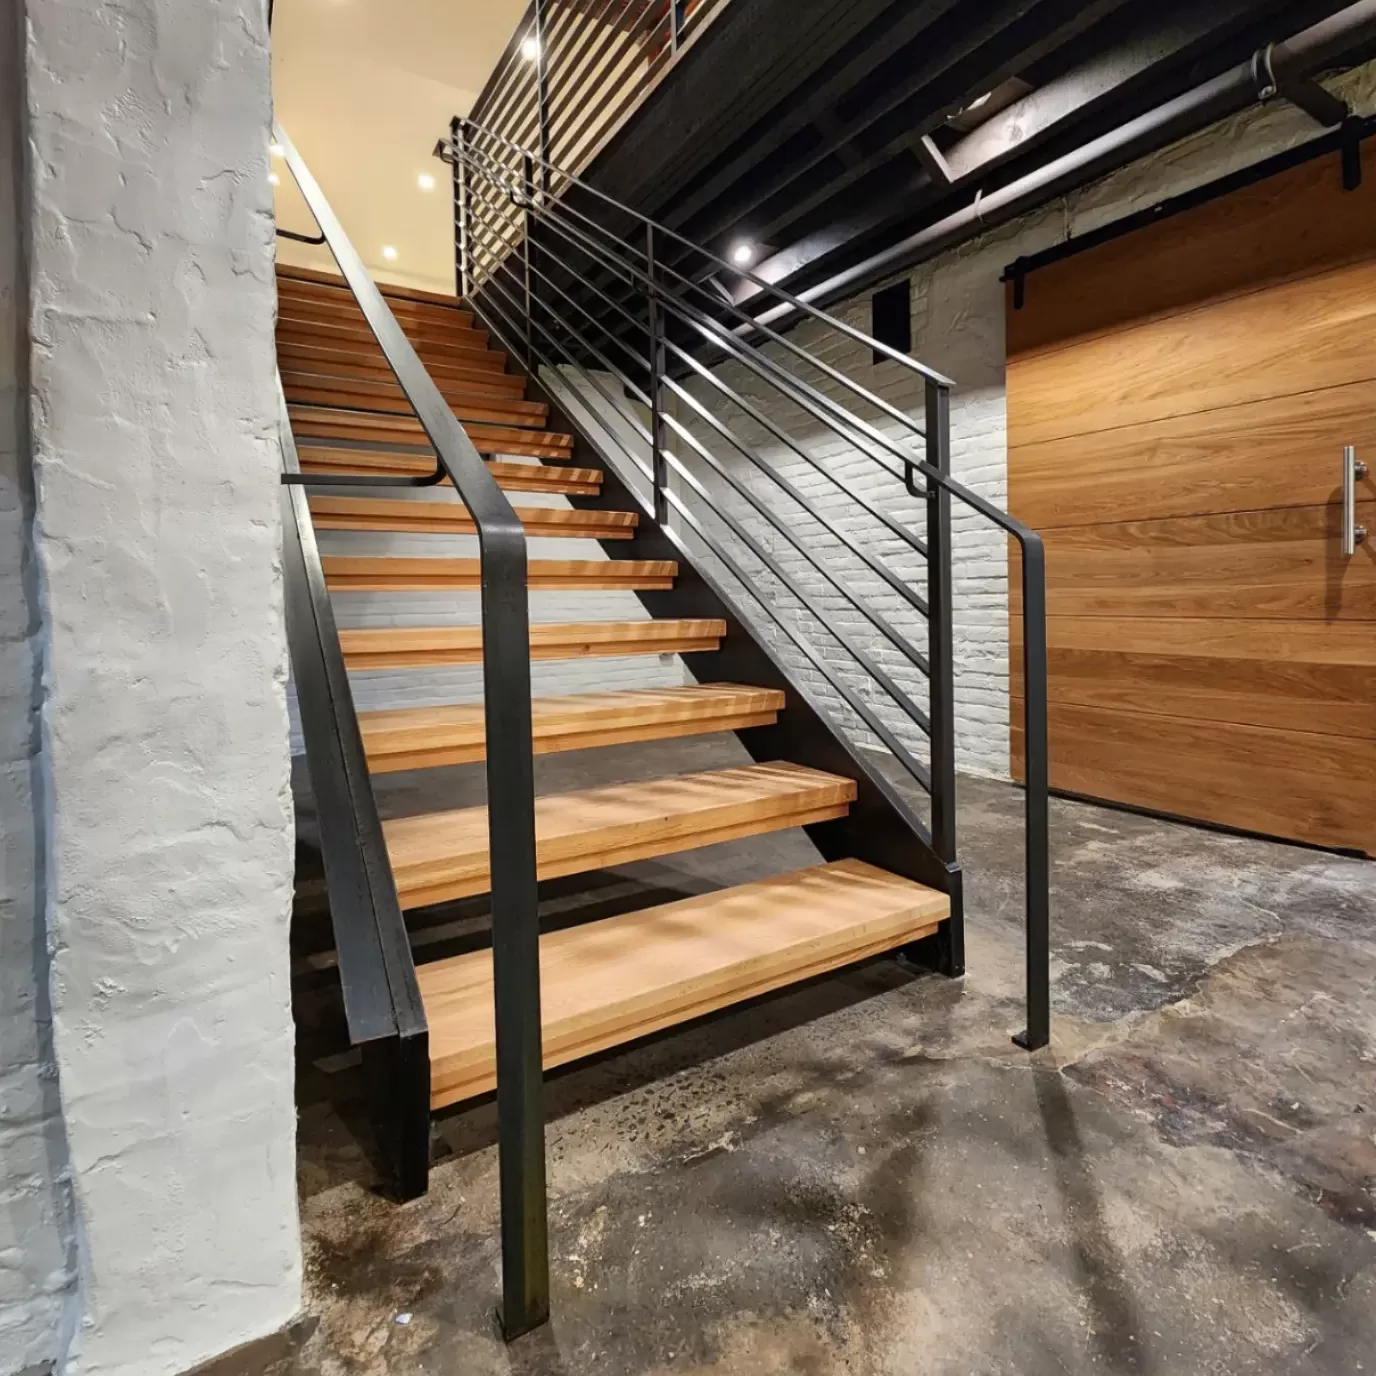 Modern wooden staircase with metal structure and railing